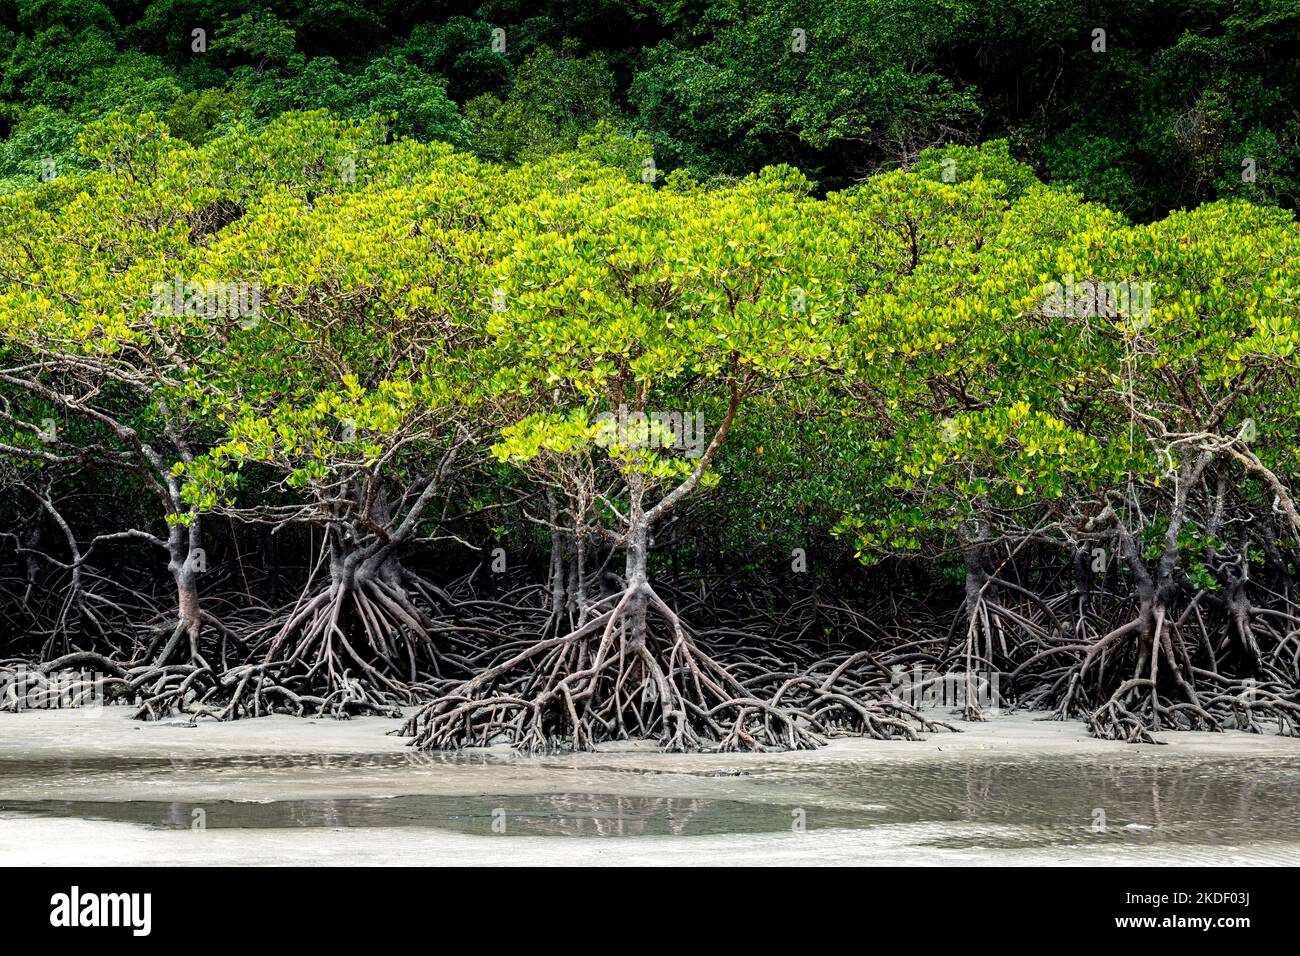 Impressive mangrove roots at Cape Tribulation in Daintree National Park. Stock Photo